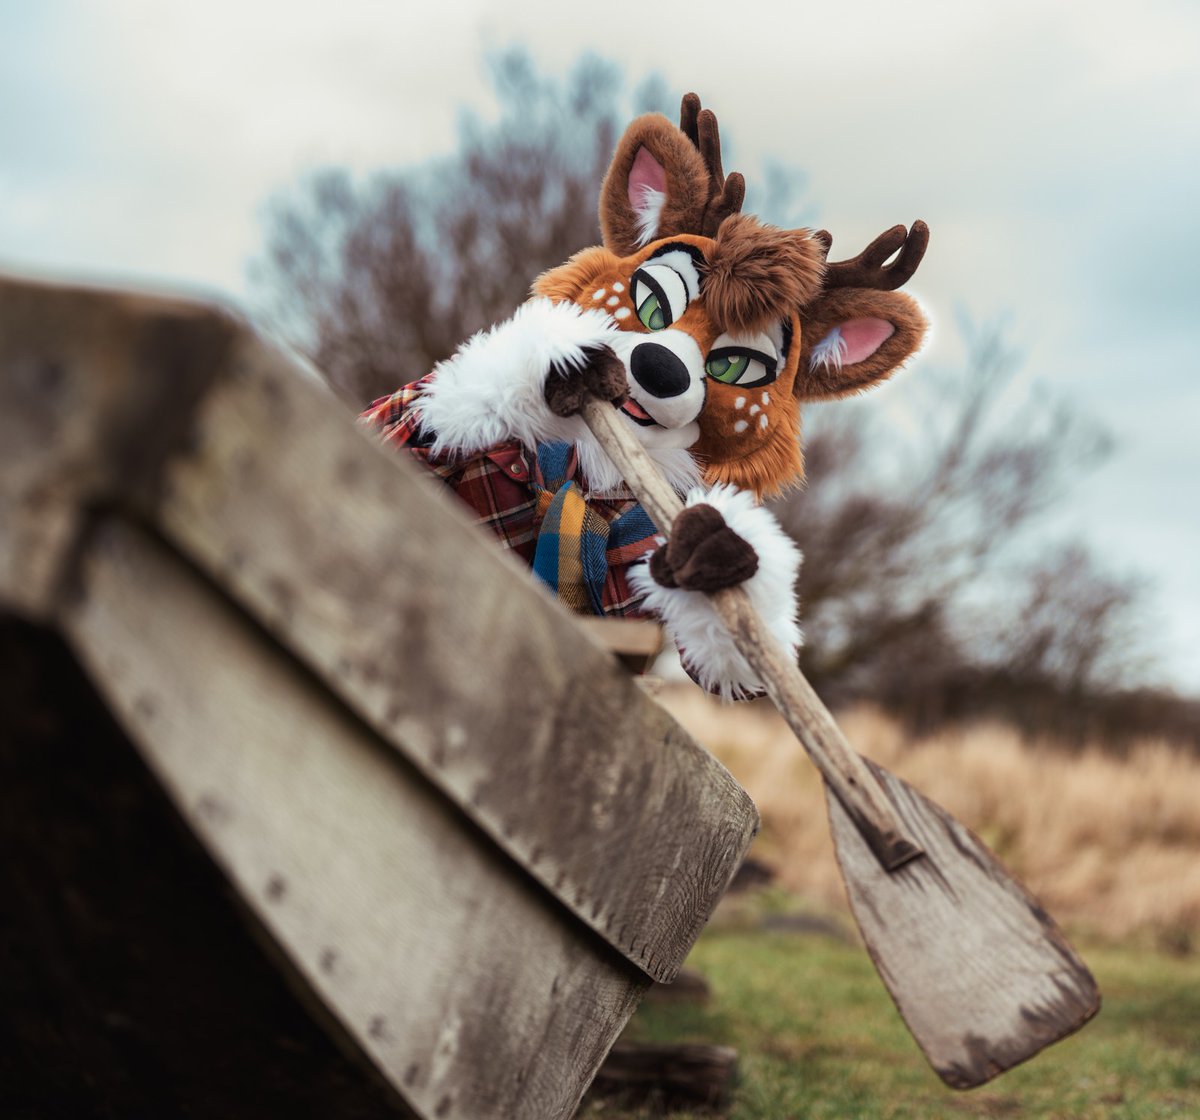 Rowing into the weekend this #FursuitFriday 📸: @Nighti331